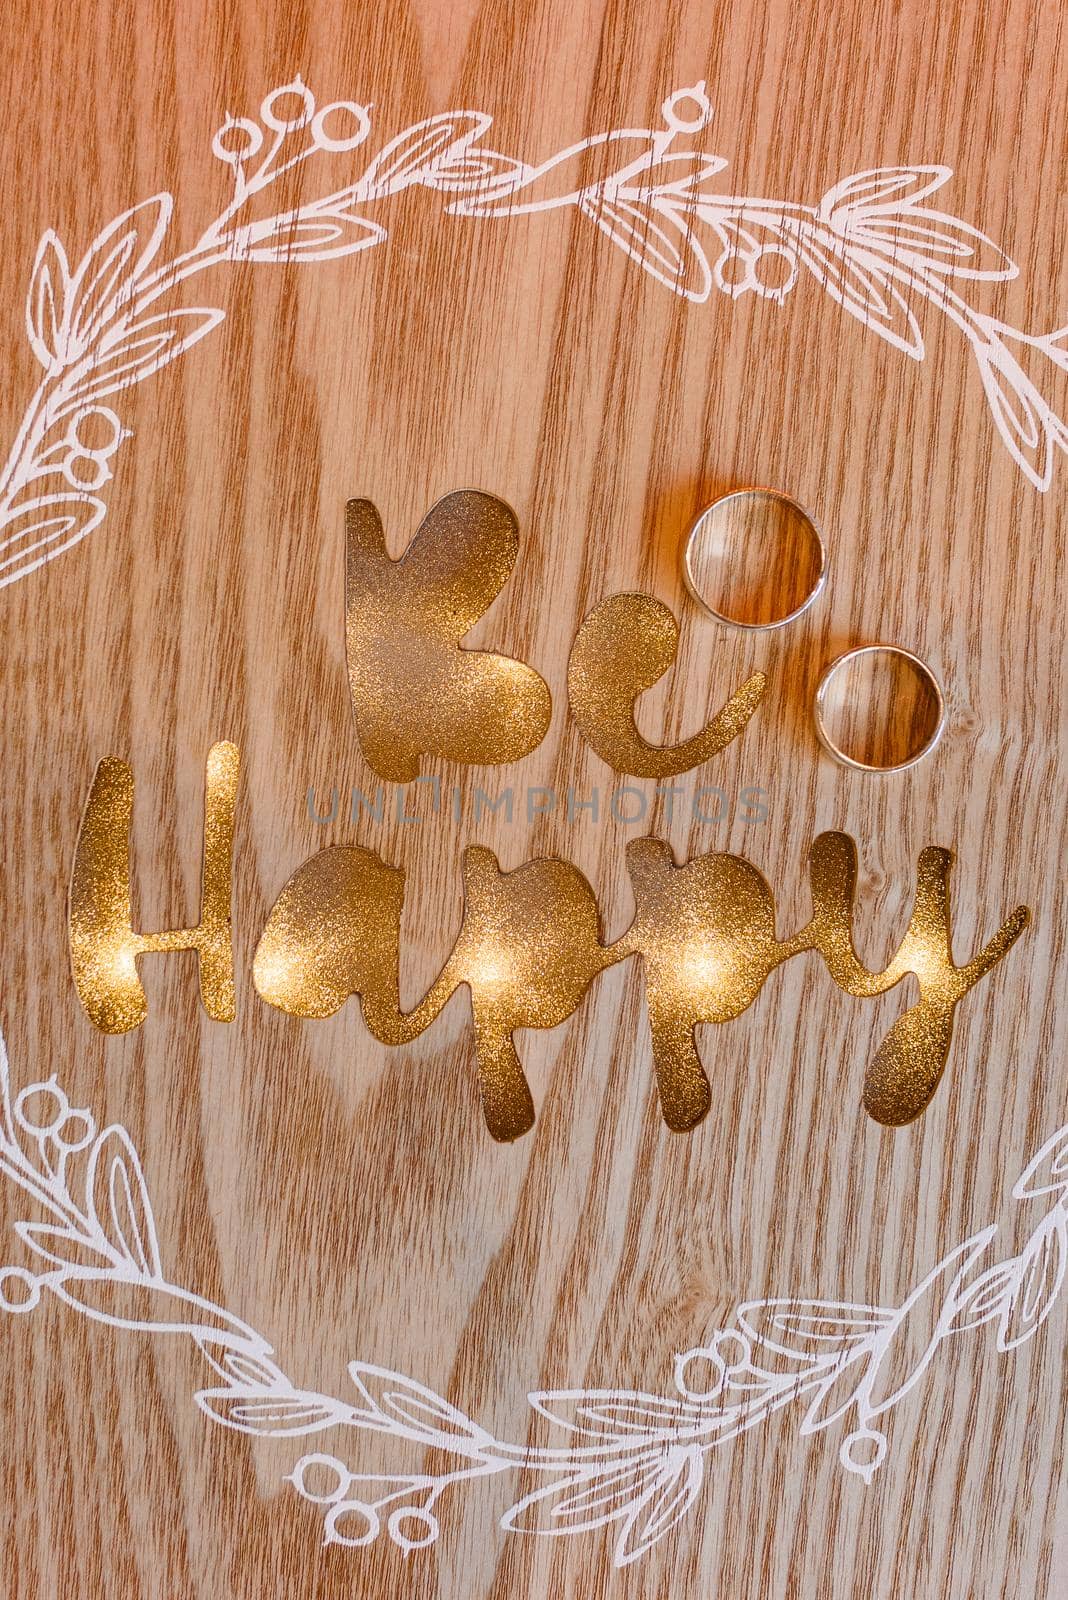 Wedding rings on a wooden background with golden inscription be happy and white pattern.